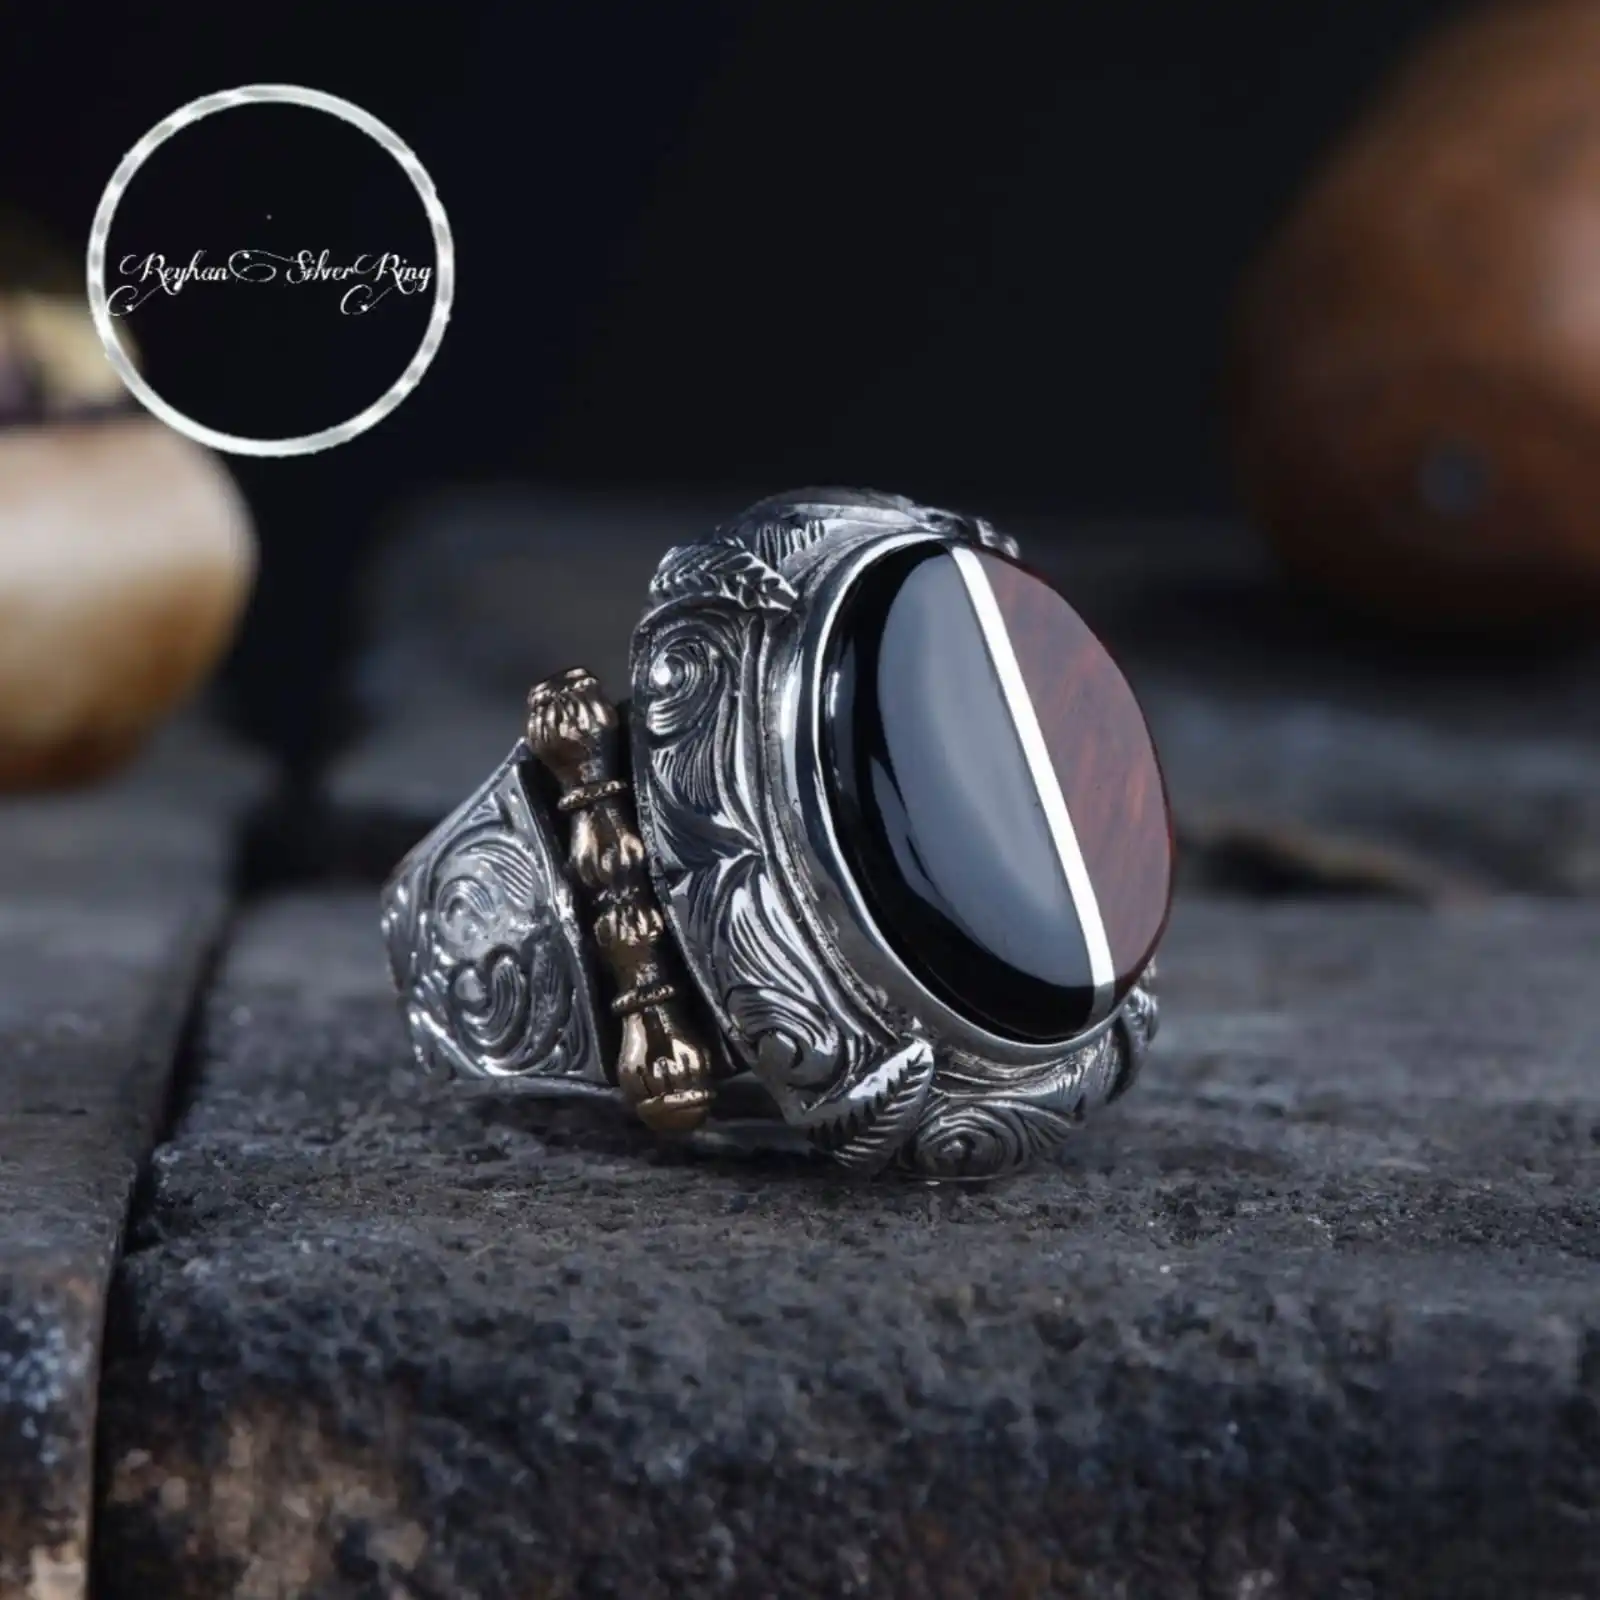 Handcrafted Silver Inlaid Men's Ring with Coca and Oltu Stone - Unique Splitting and Pencil Engraved Design stone 4 3 to 10 1 inch hmi smart tft lcd module touch screen with rs232 rs485 ttl for arduino esp32 project and industry use